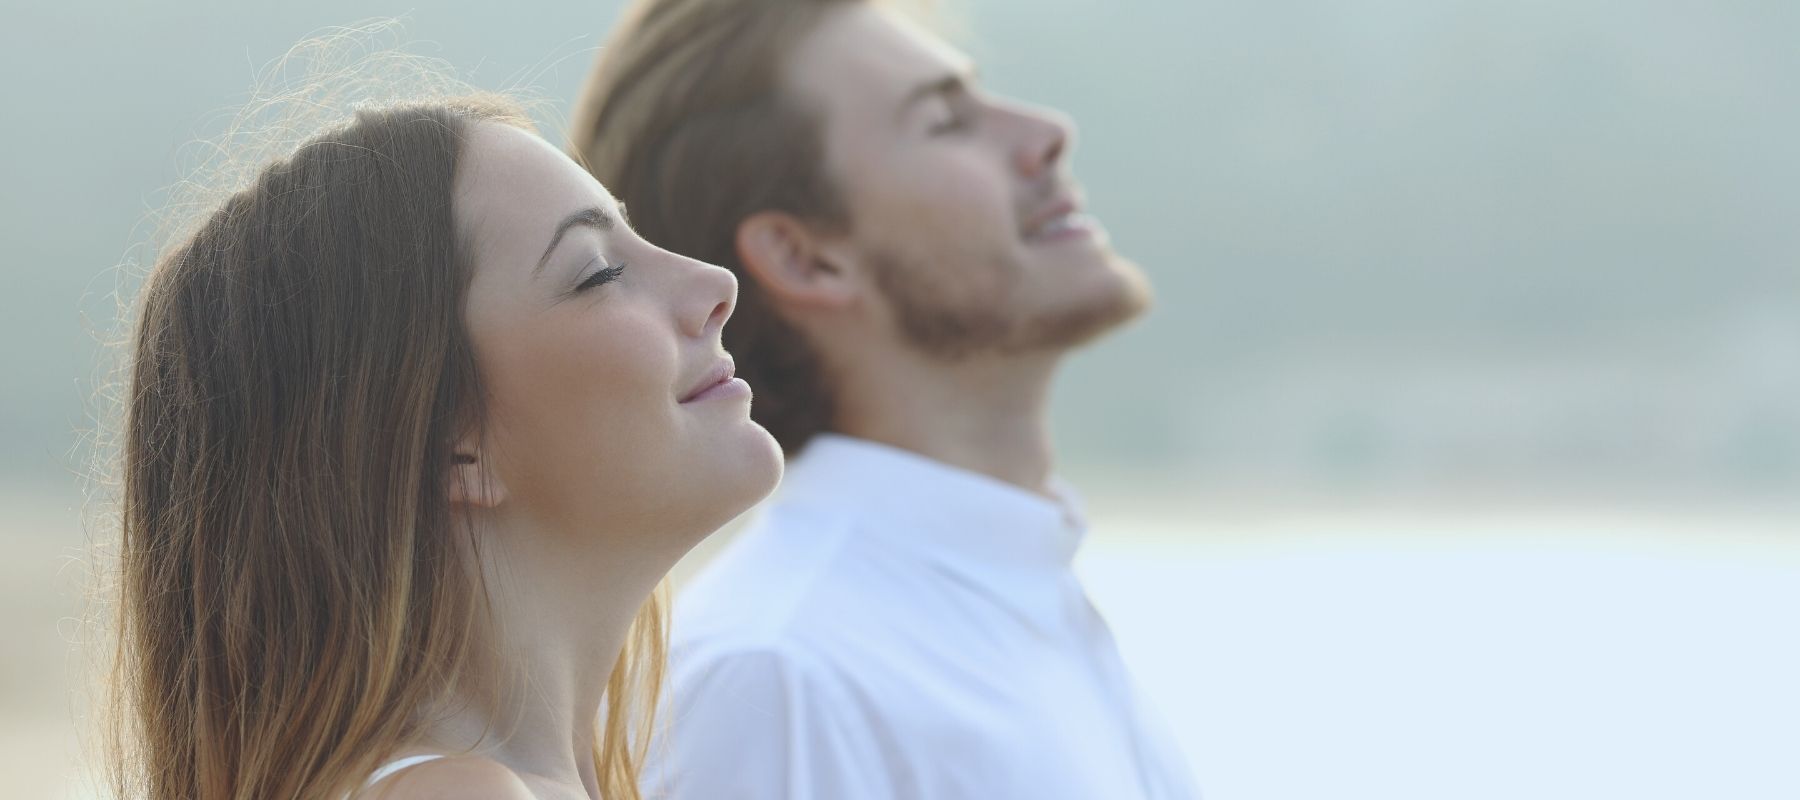 Man and woman breathing in fresh air together